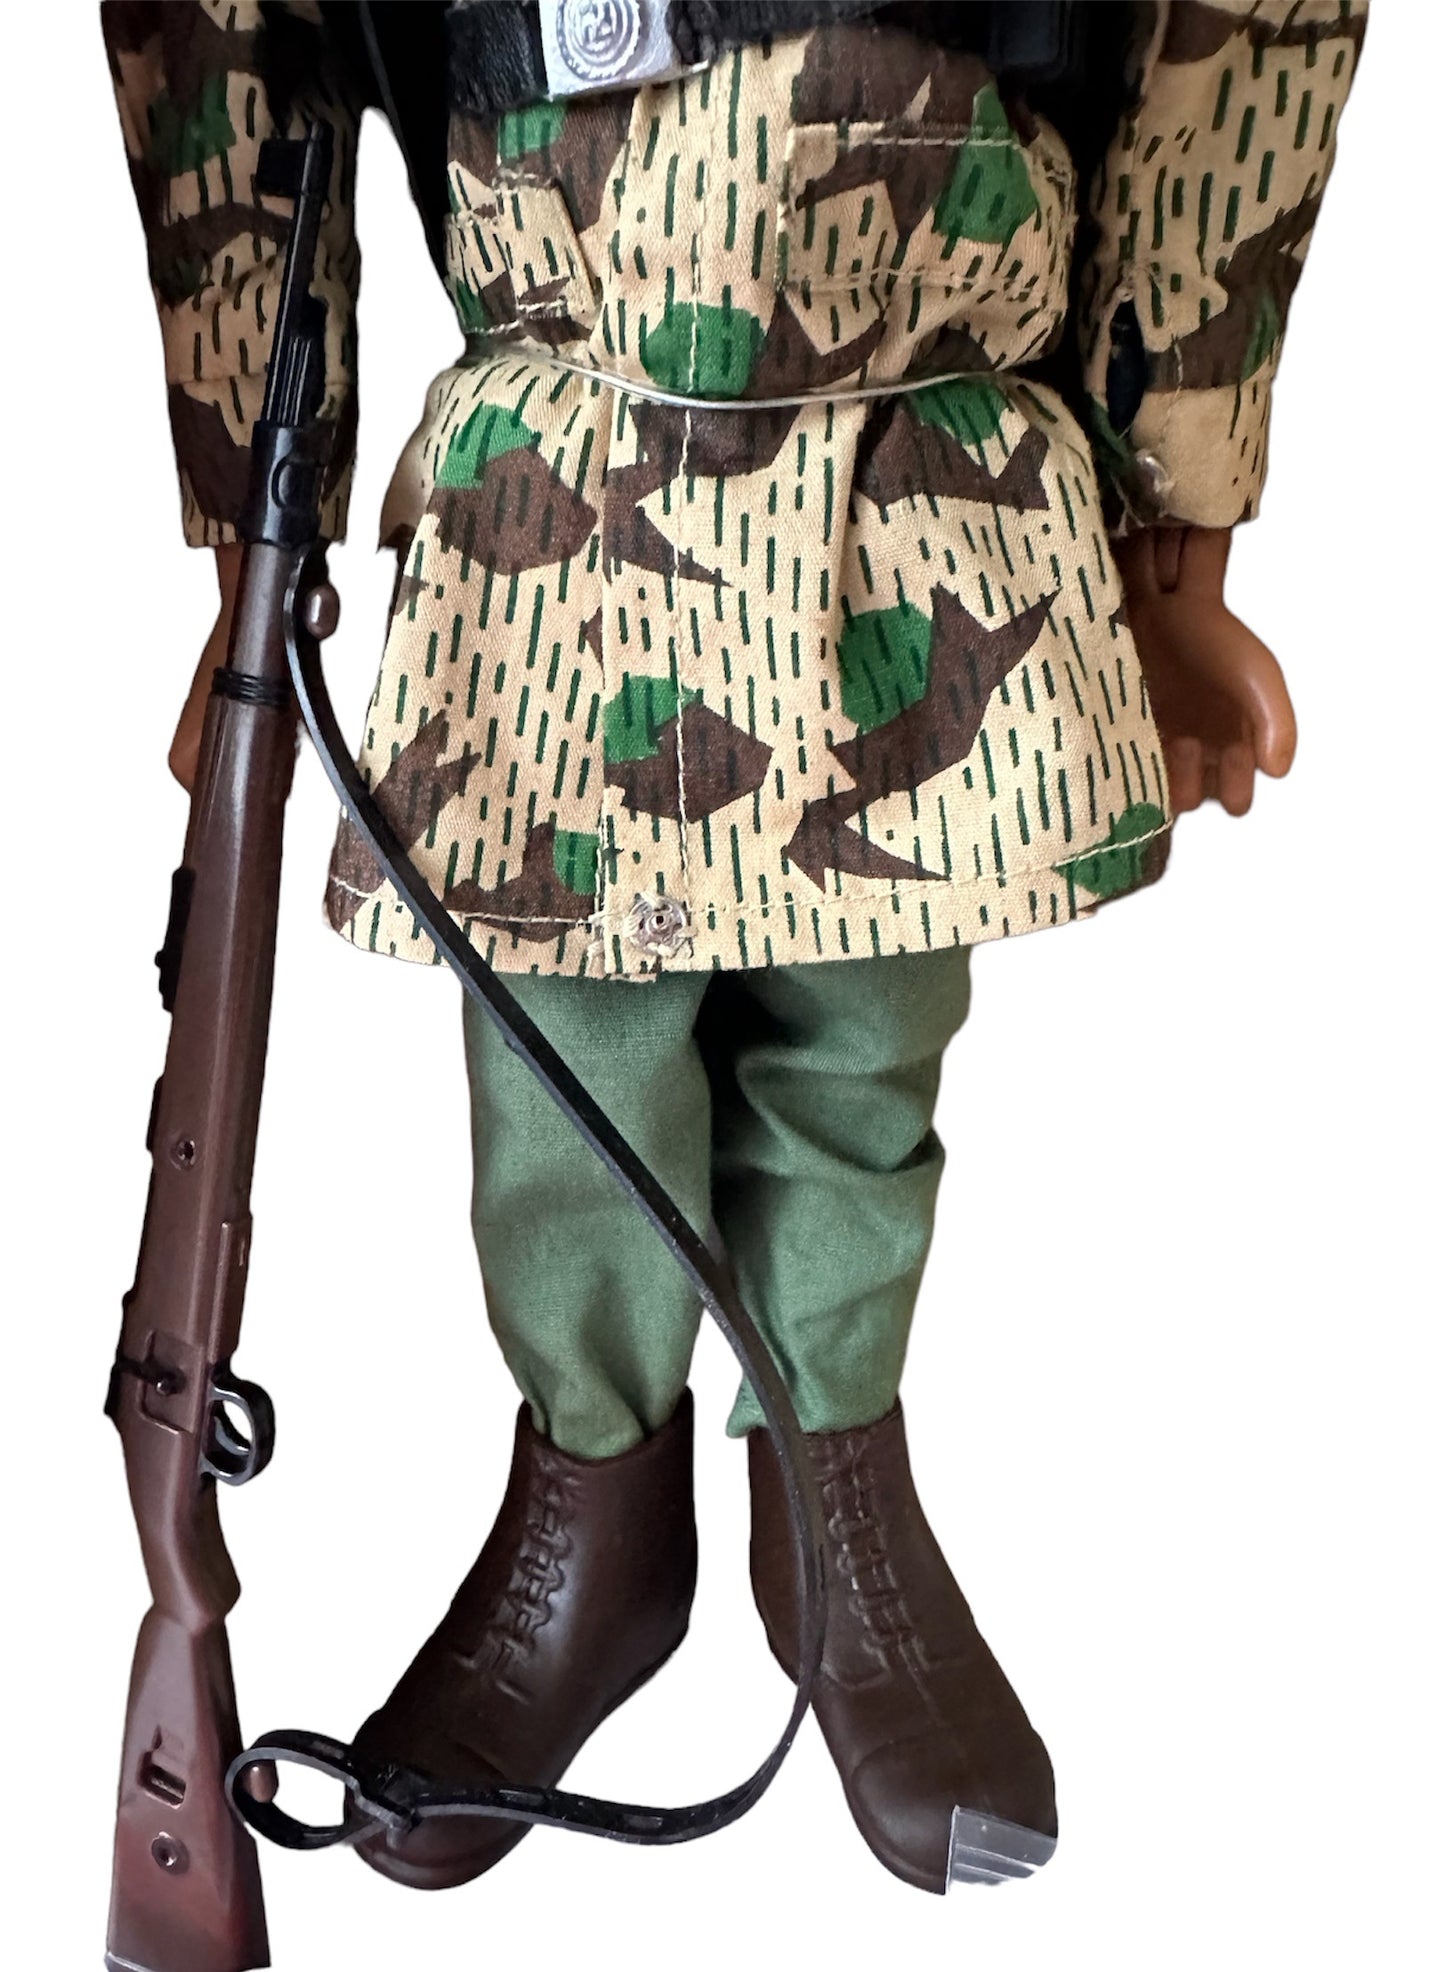 Vintage 2008 Action Man 40th Anniversary - The Soldiers -  German Fallschirmjager 12 Inch Action Figure With Realistic Blonde Hair, Eagle Eyes And Gripping Hands -  In The Original Box - Shop Stock Room Find